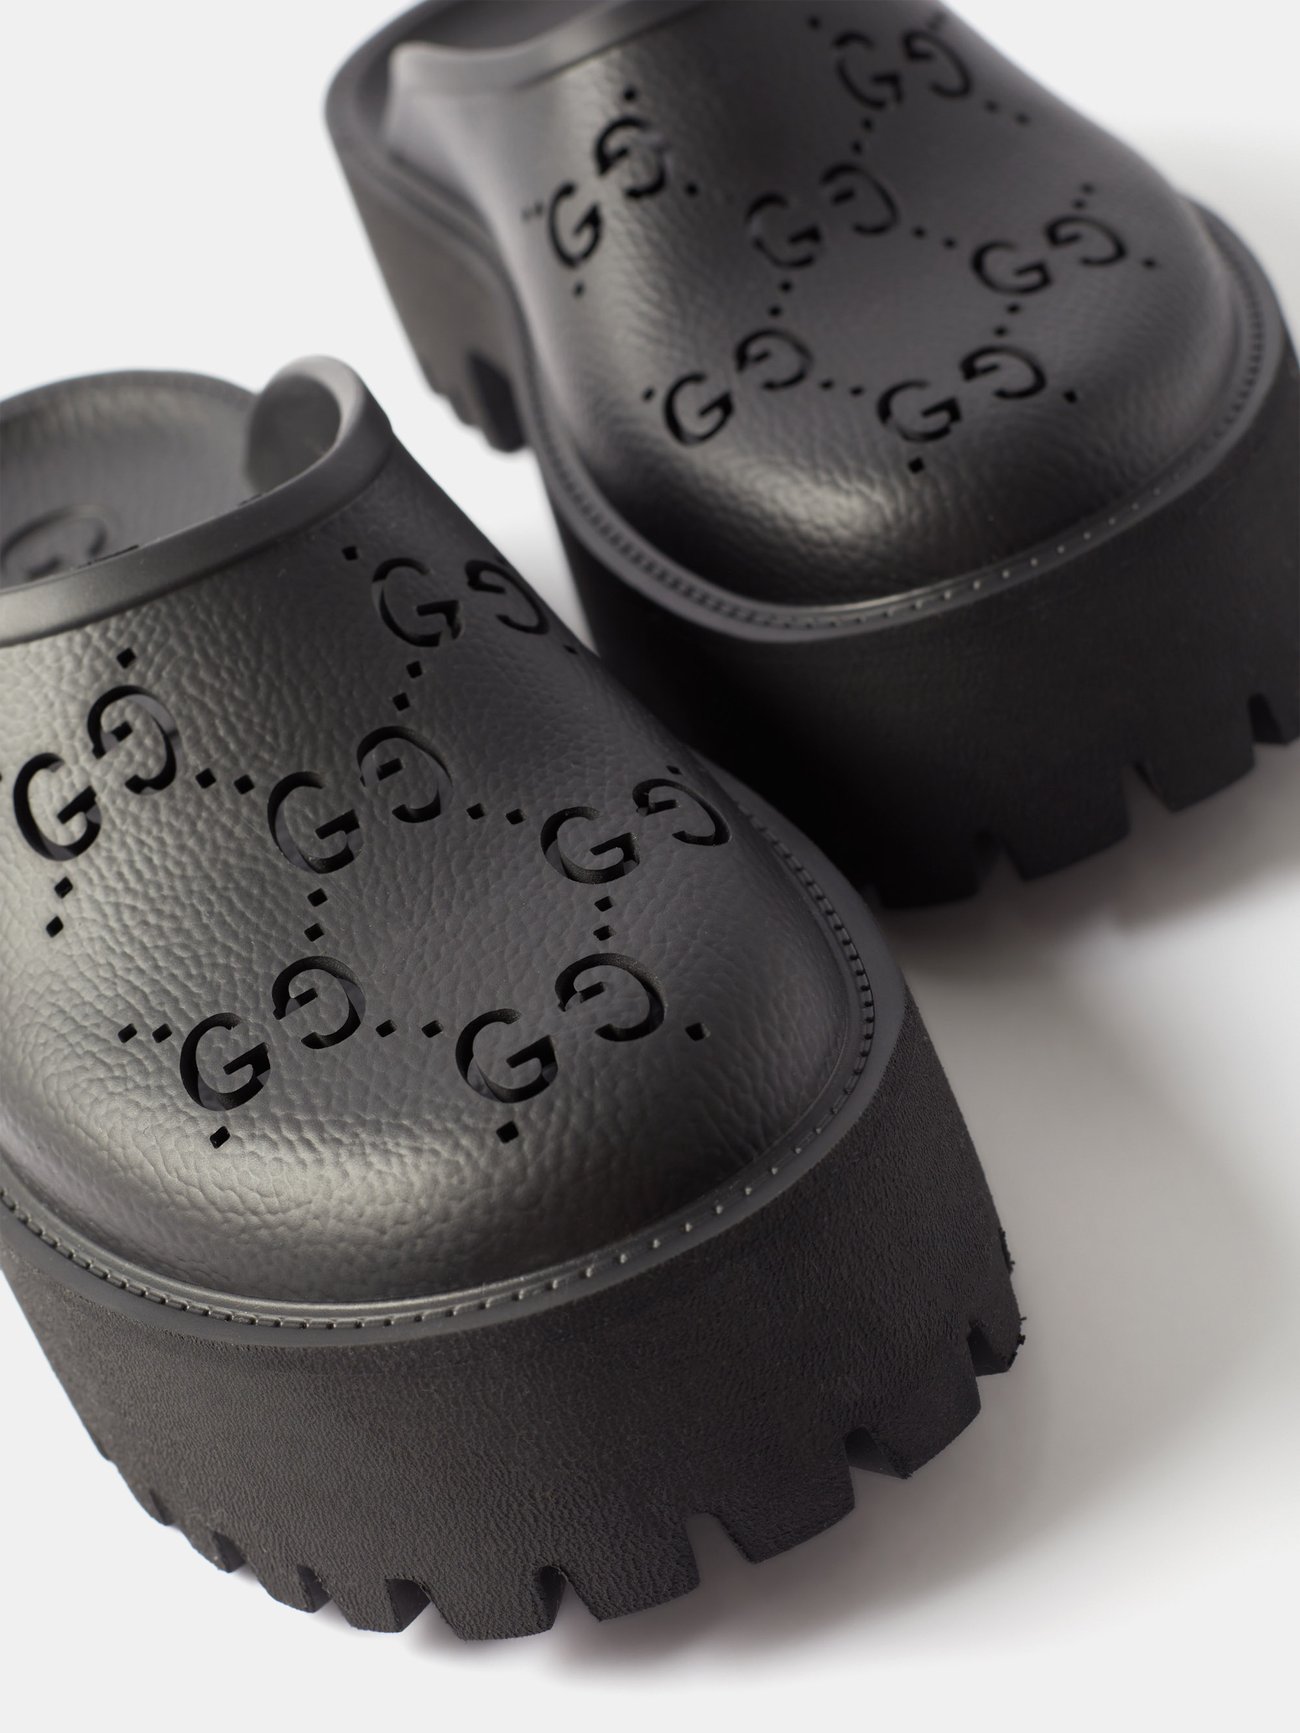 Gucci's Latest Perforated Rubber Clogs Worth Rs 40K Leave Netizens